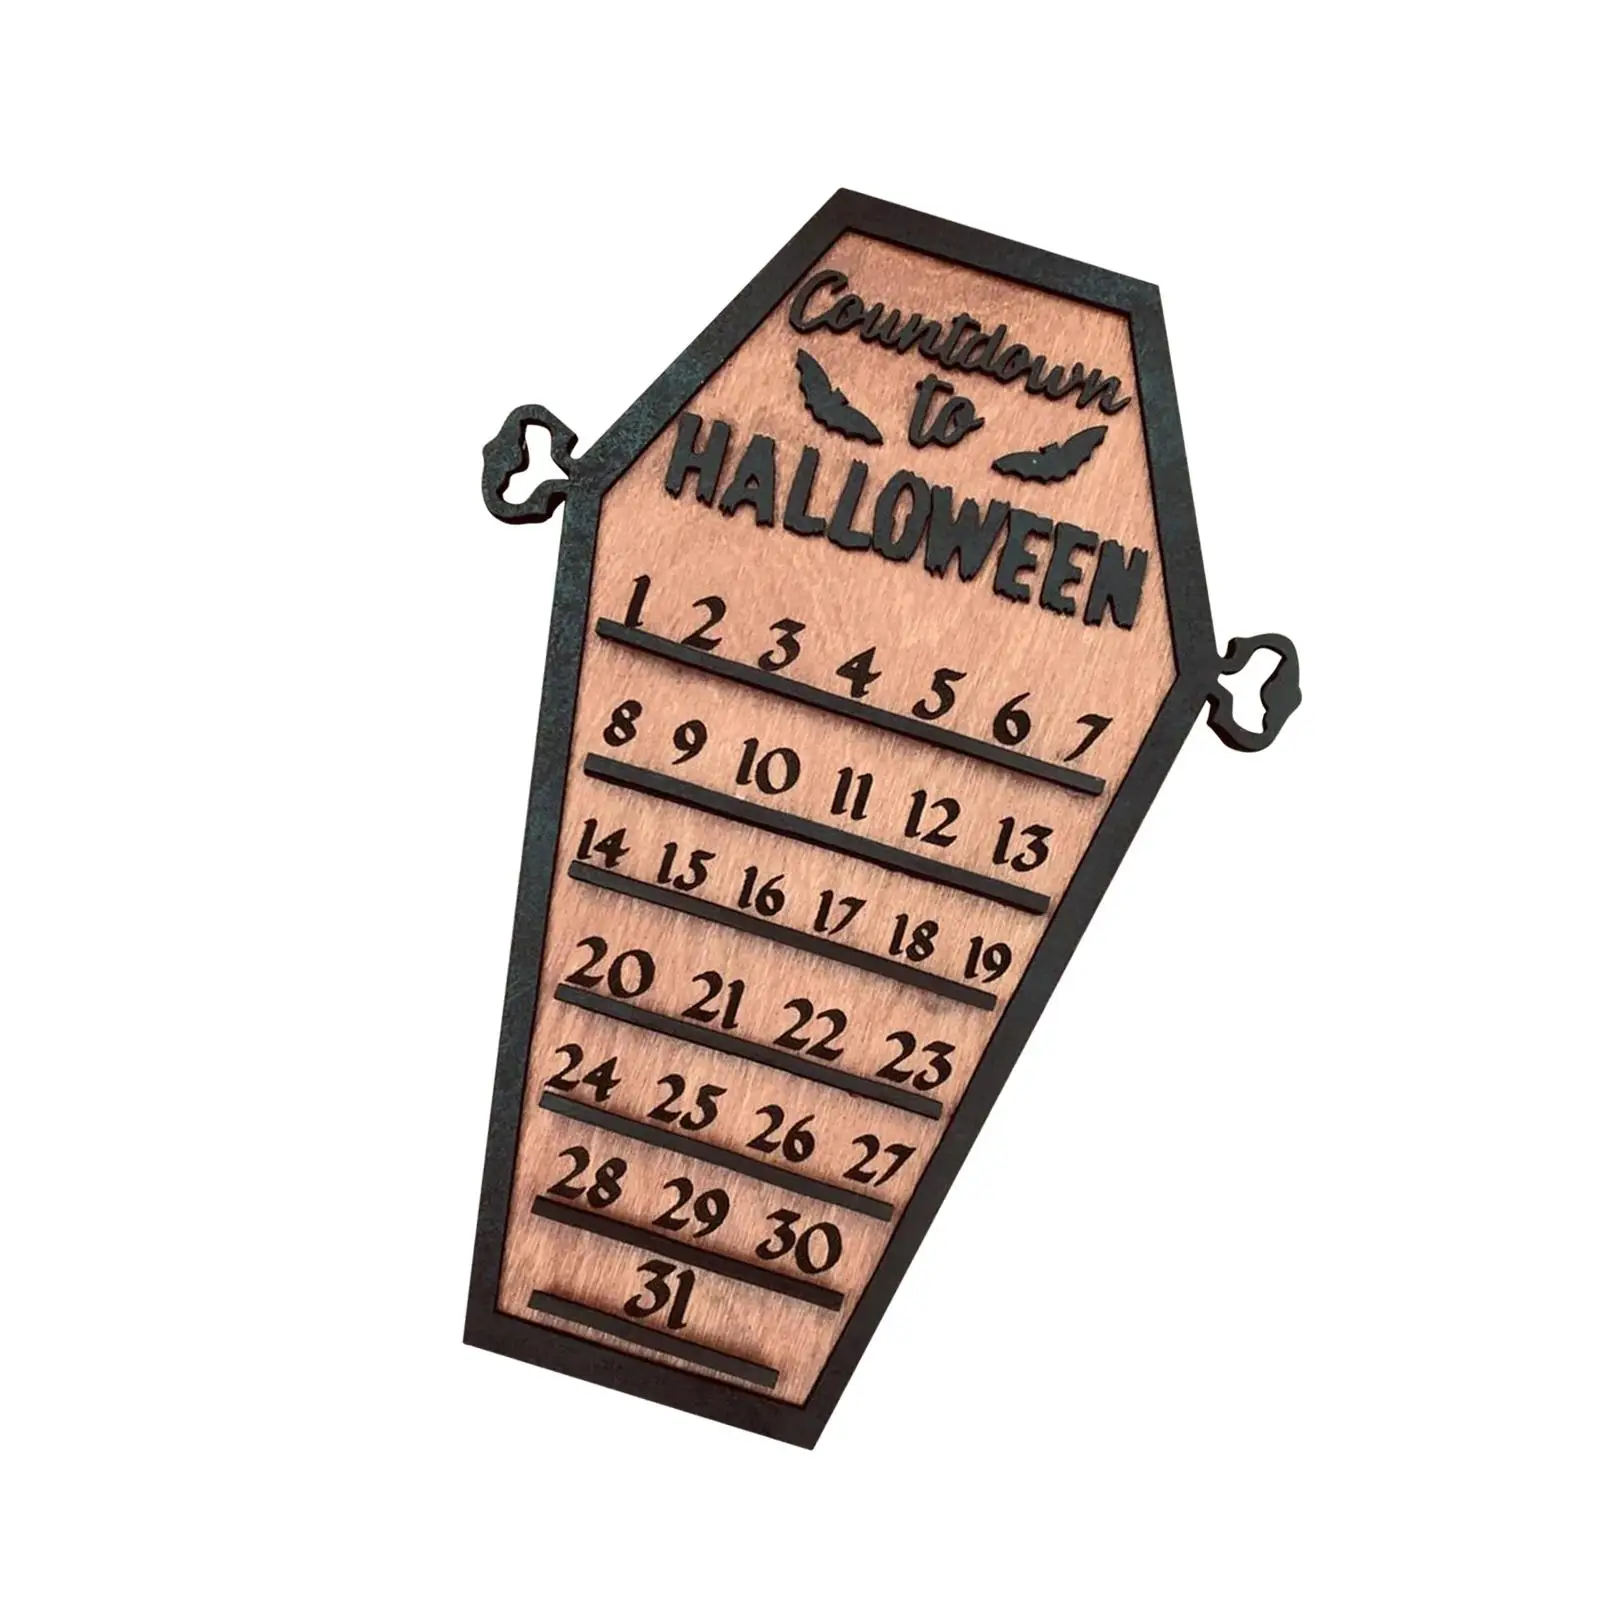 Halloween Countdown Calendar Wood Crafts 31 Day Halloween Advent Calendar Ornaments for Haunted House Party Home Festive Table